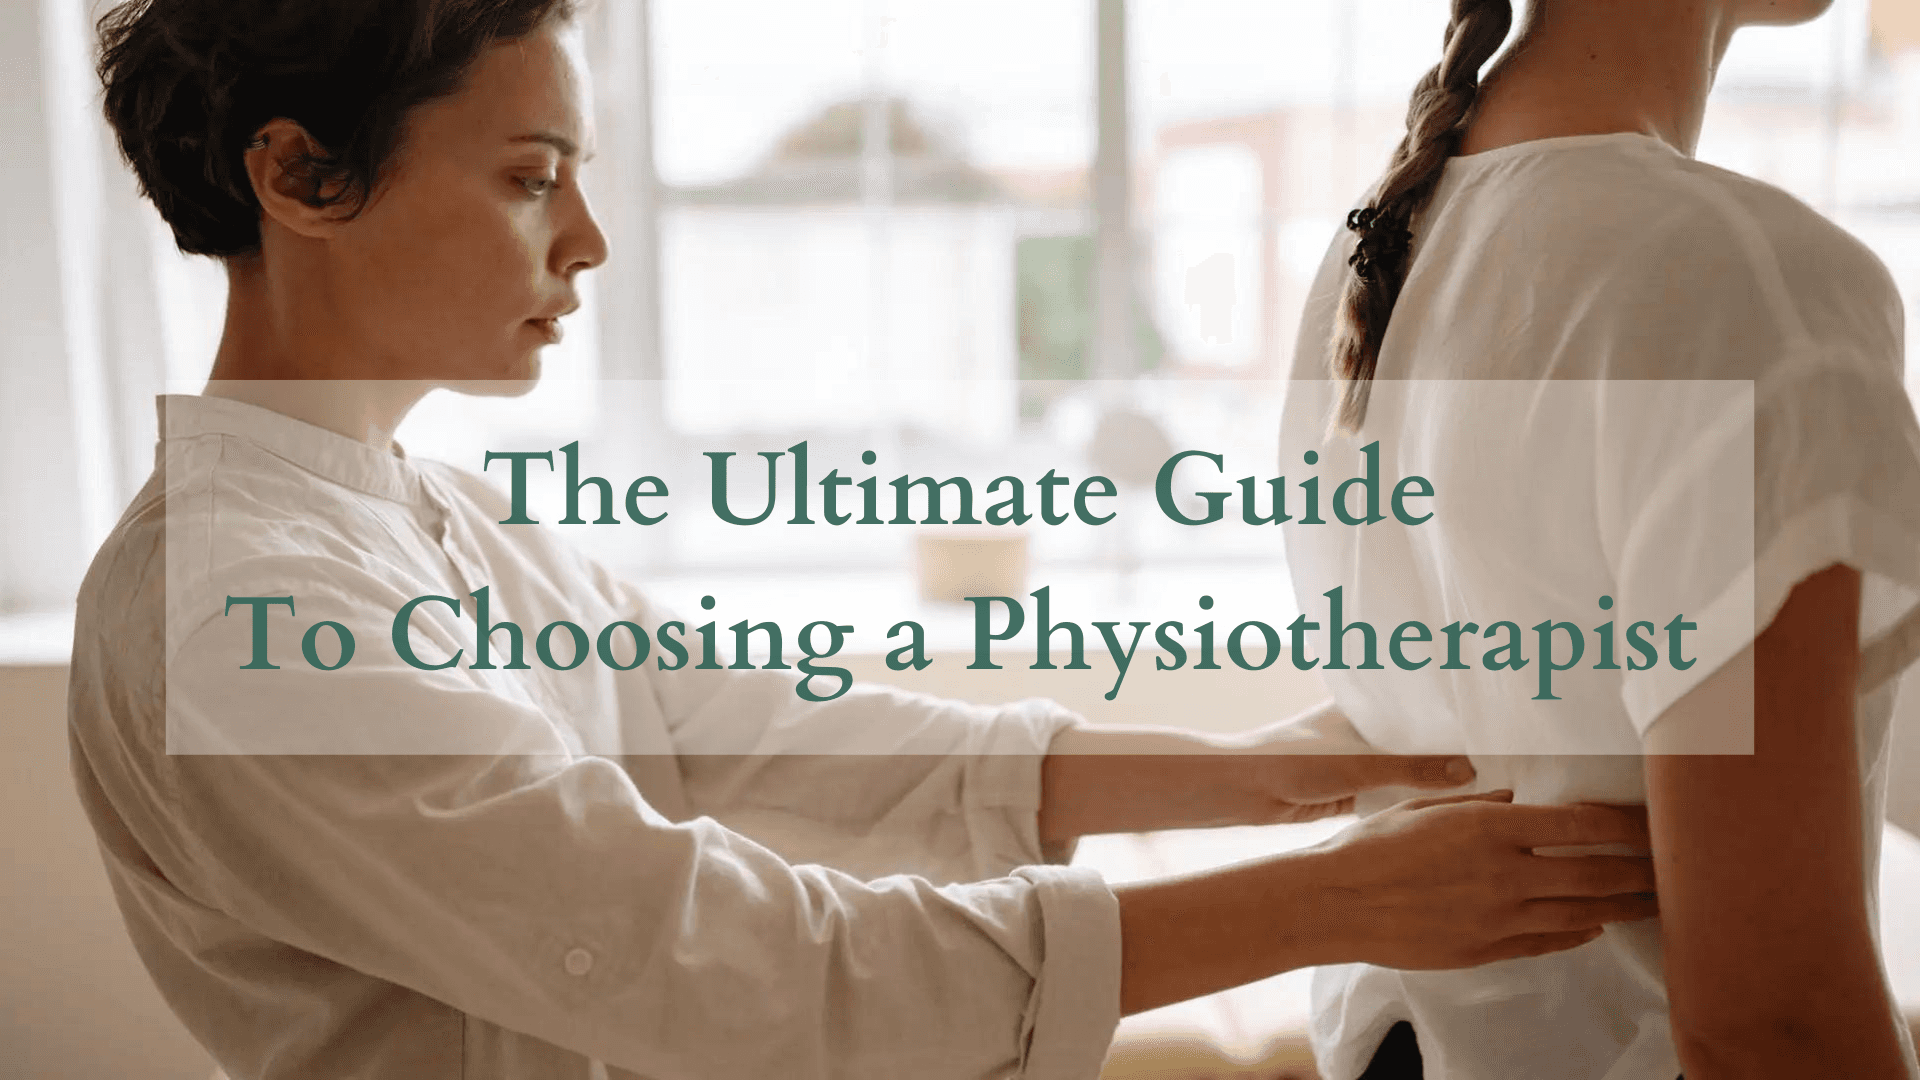 The Ultimate Guide to Choosing a Physiotherapist